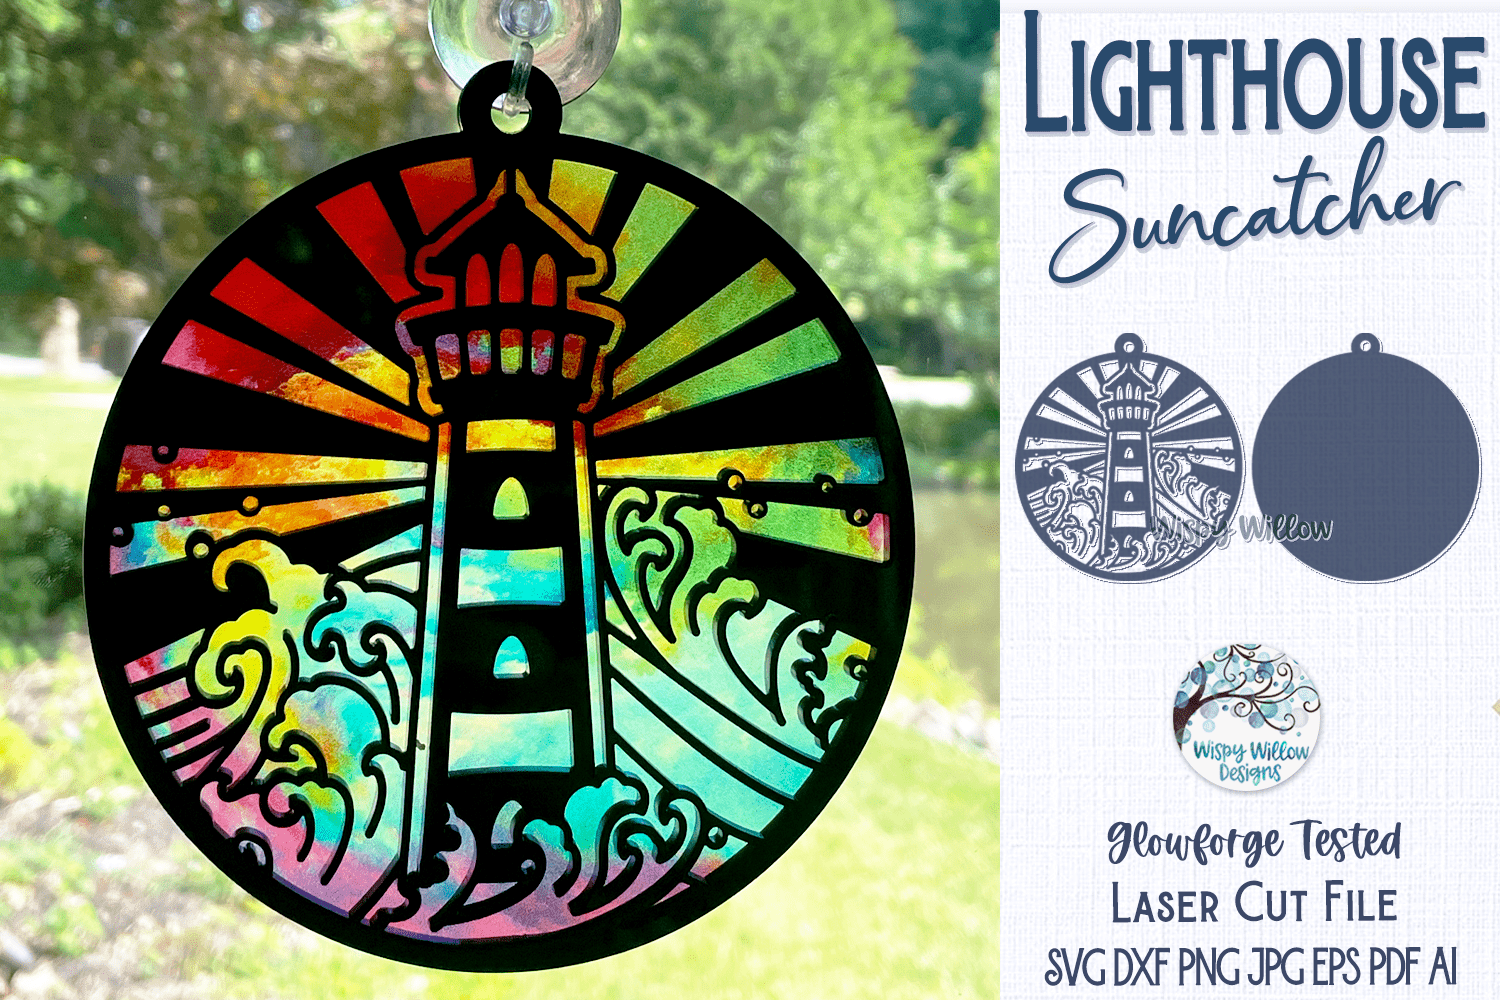 Lighthouse Suncatcher for Laser or Glowforge Wispy Willow Designs Company